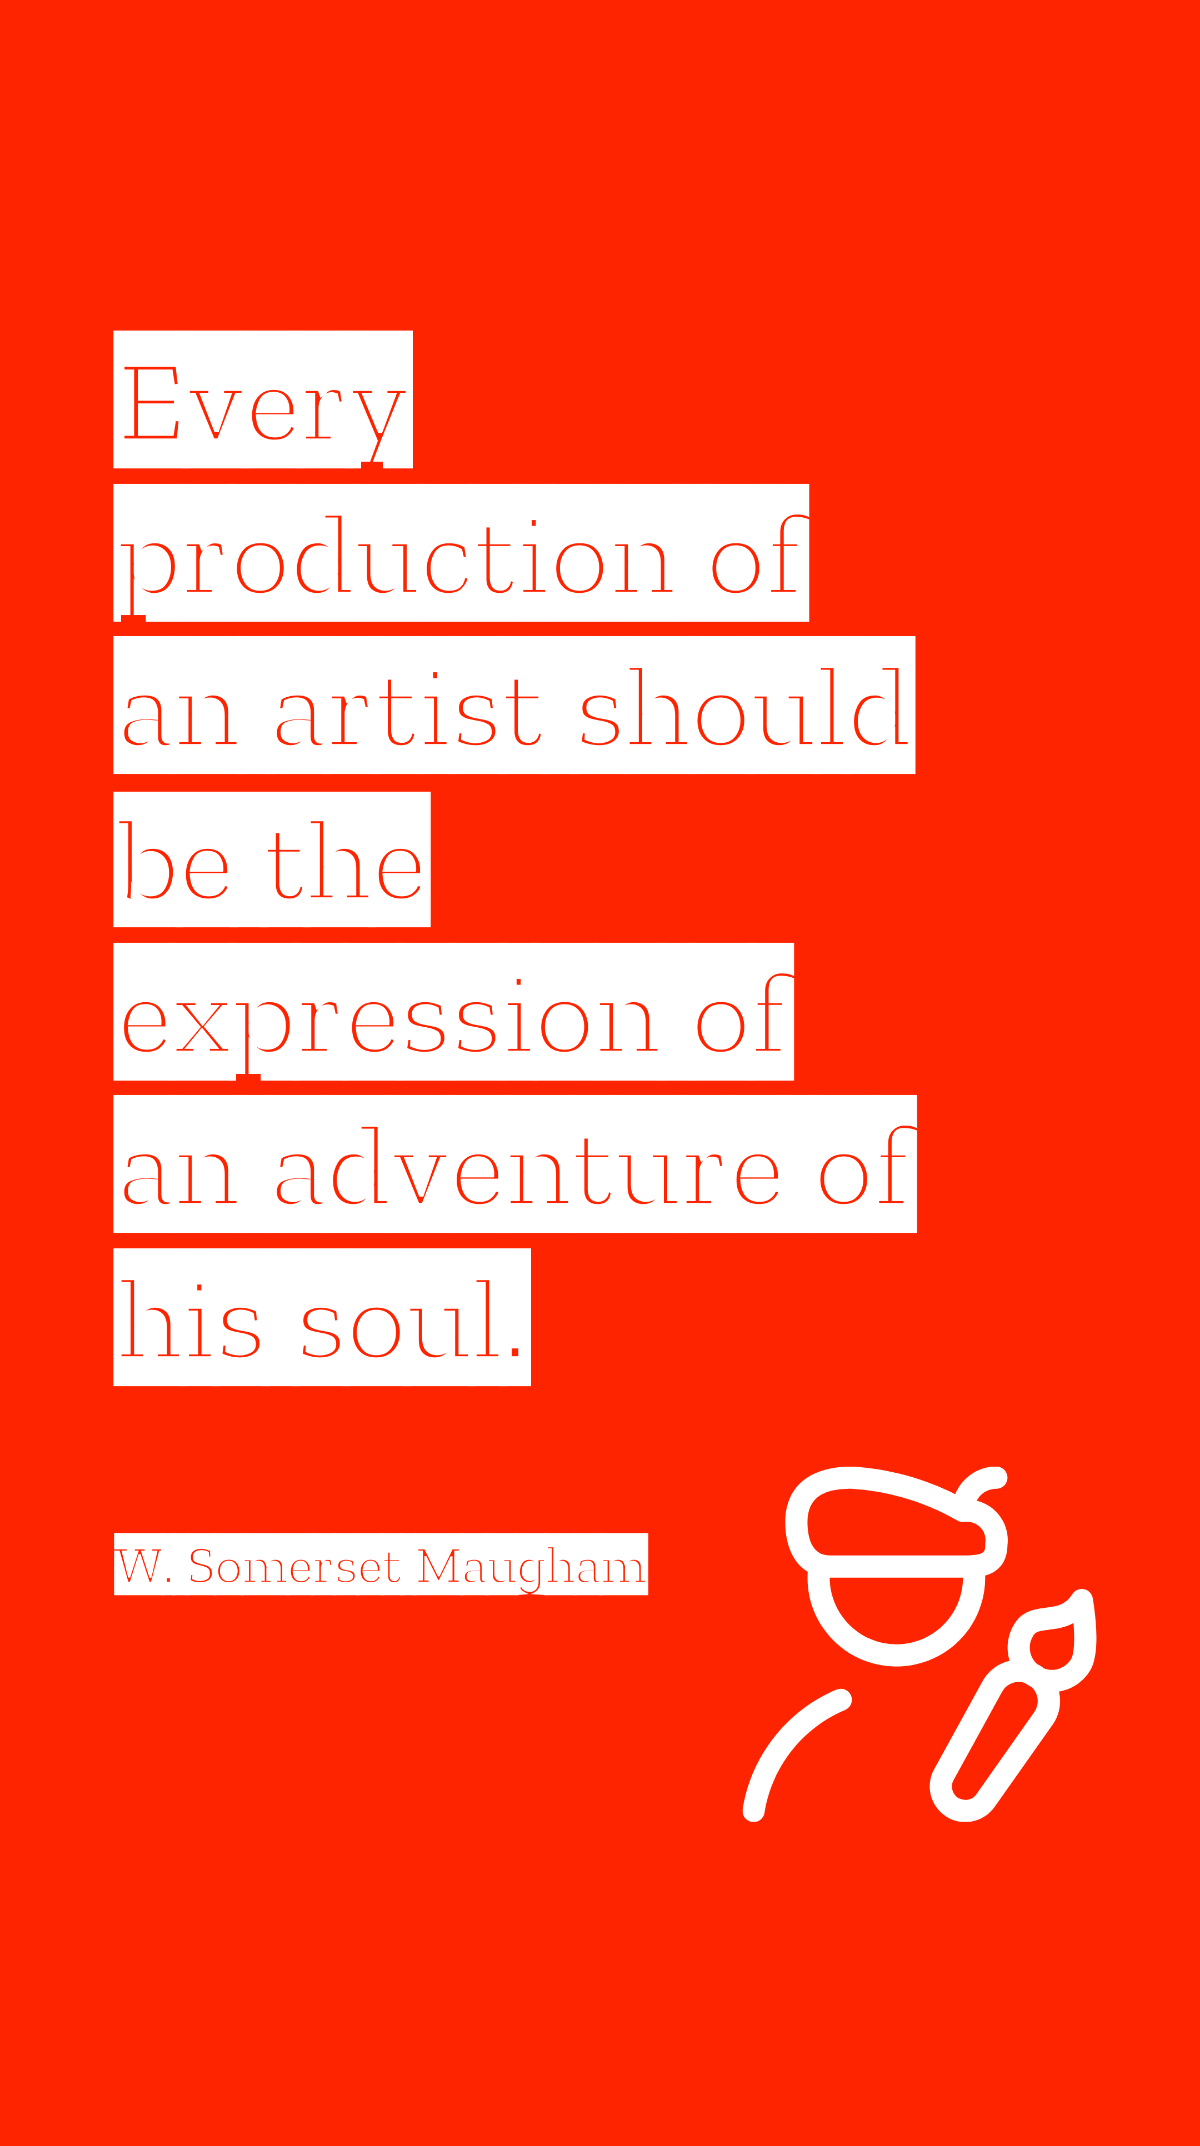 Free W. Somerset Maugham - Every production of an artist should be the expression of an adventure of his soul. Template